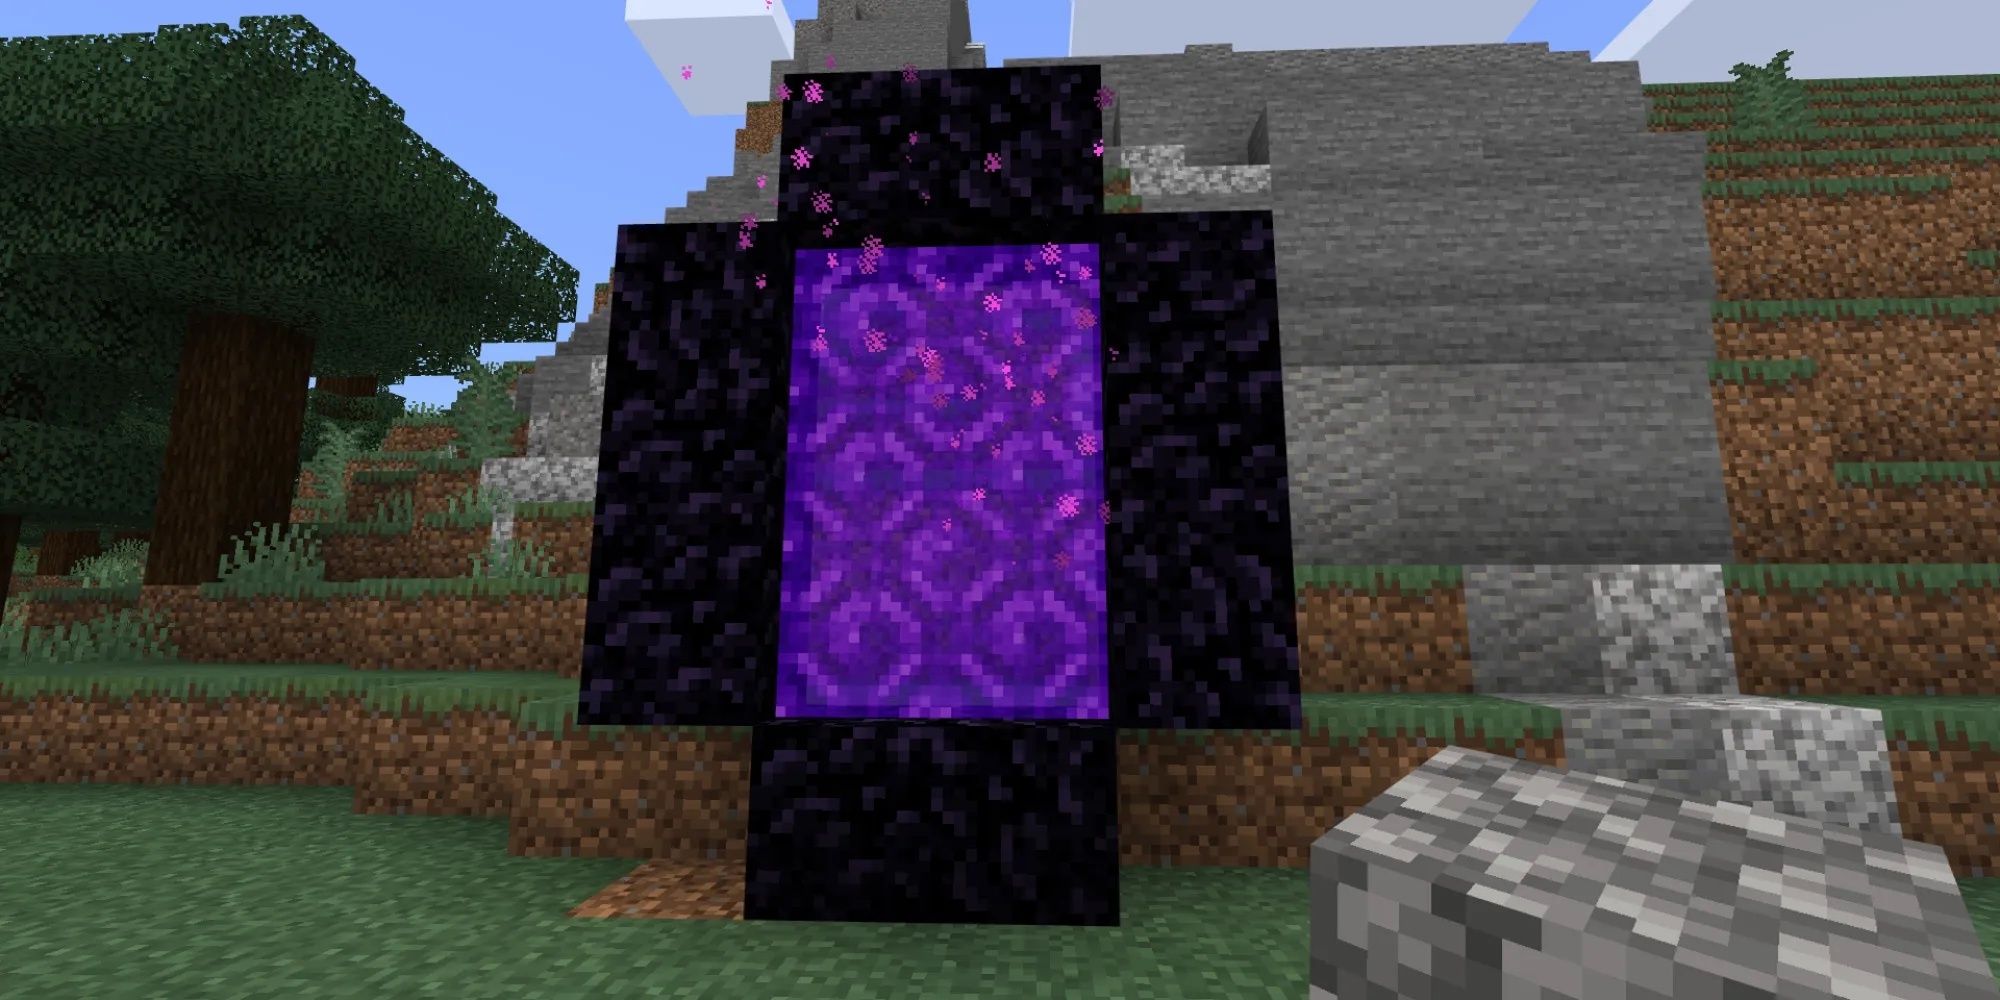 A completed Nether Portal in Minecraft using 10 obsidian blocks